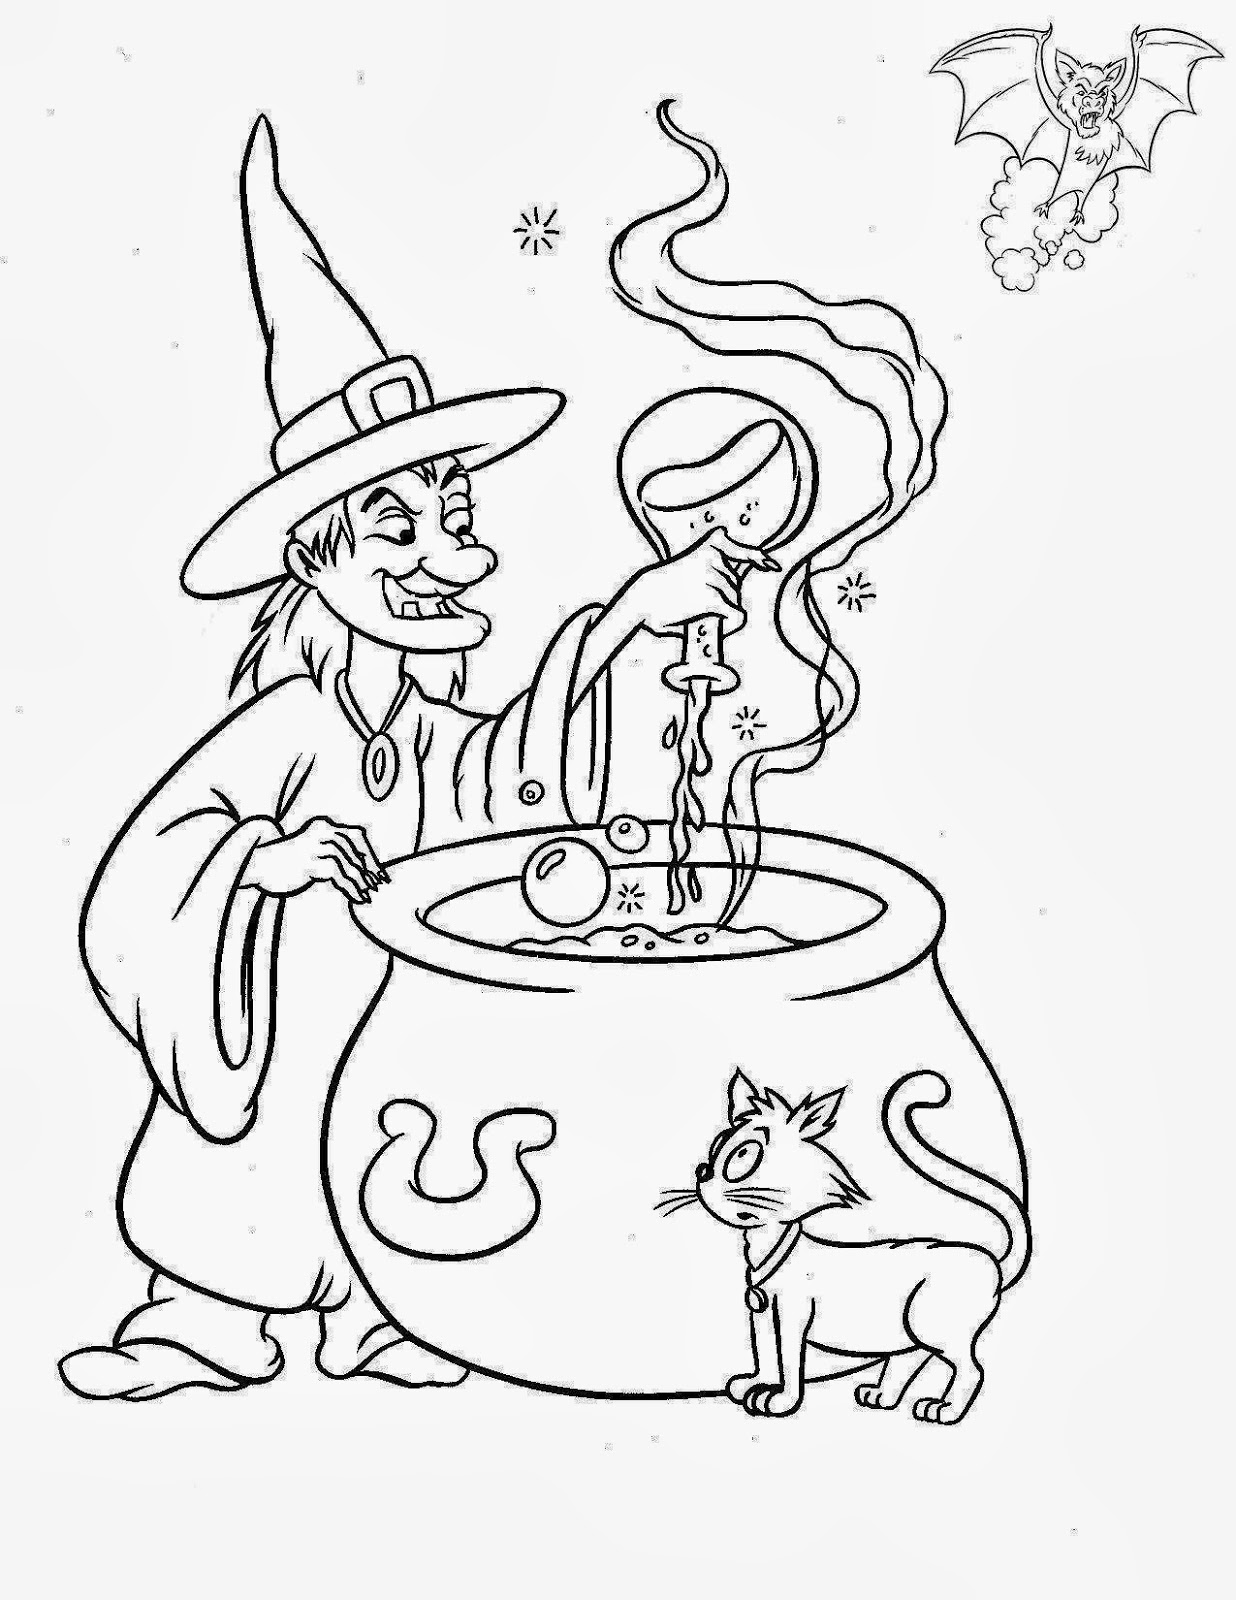 ImagesList.com: Halloween Witches for Coloring, part 1